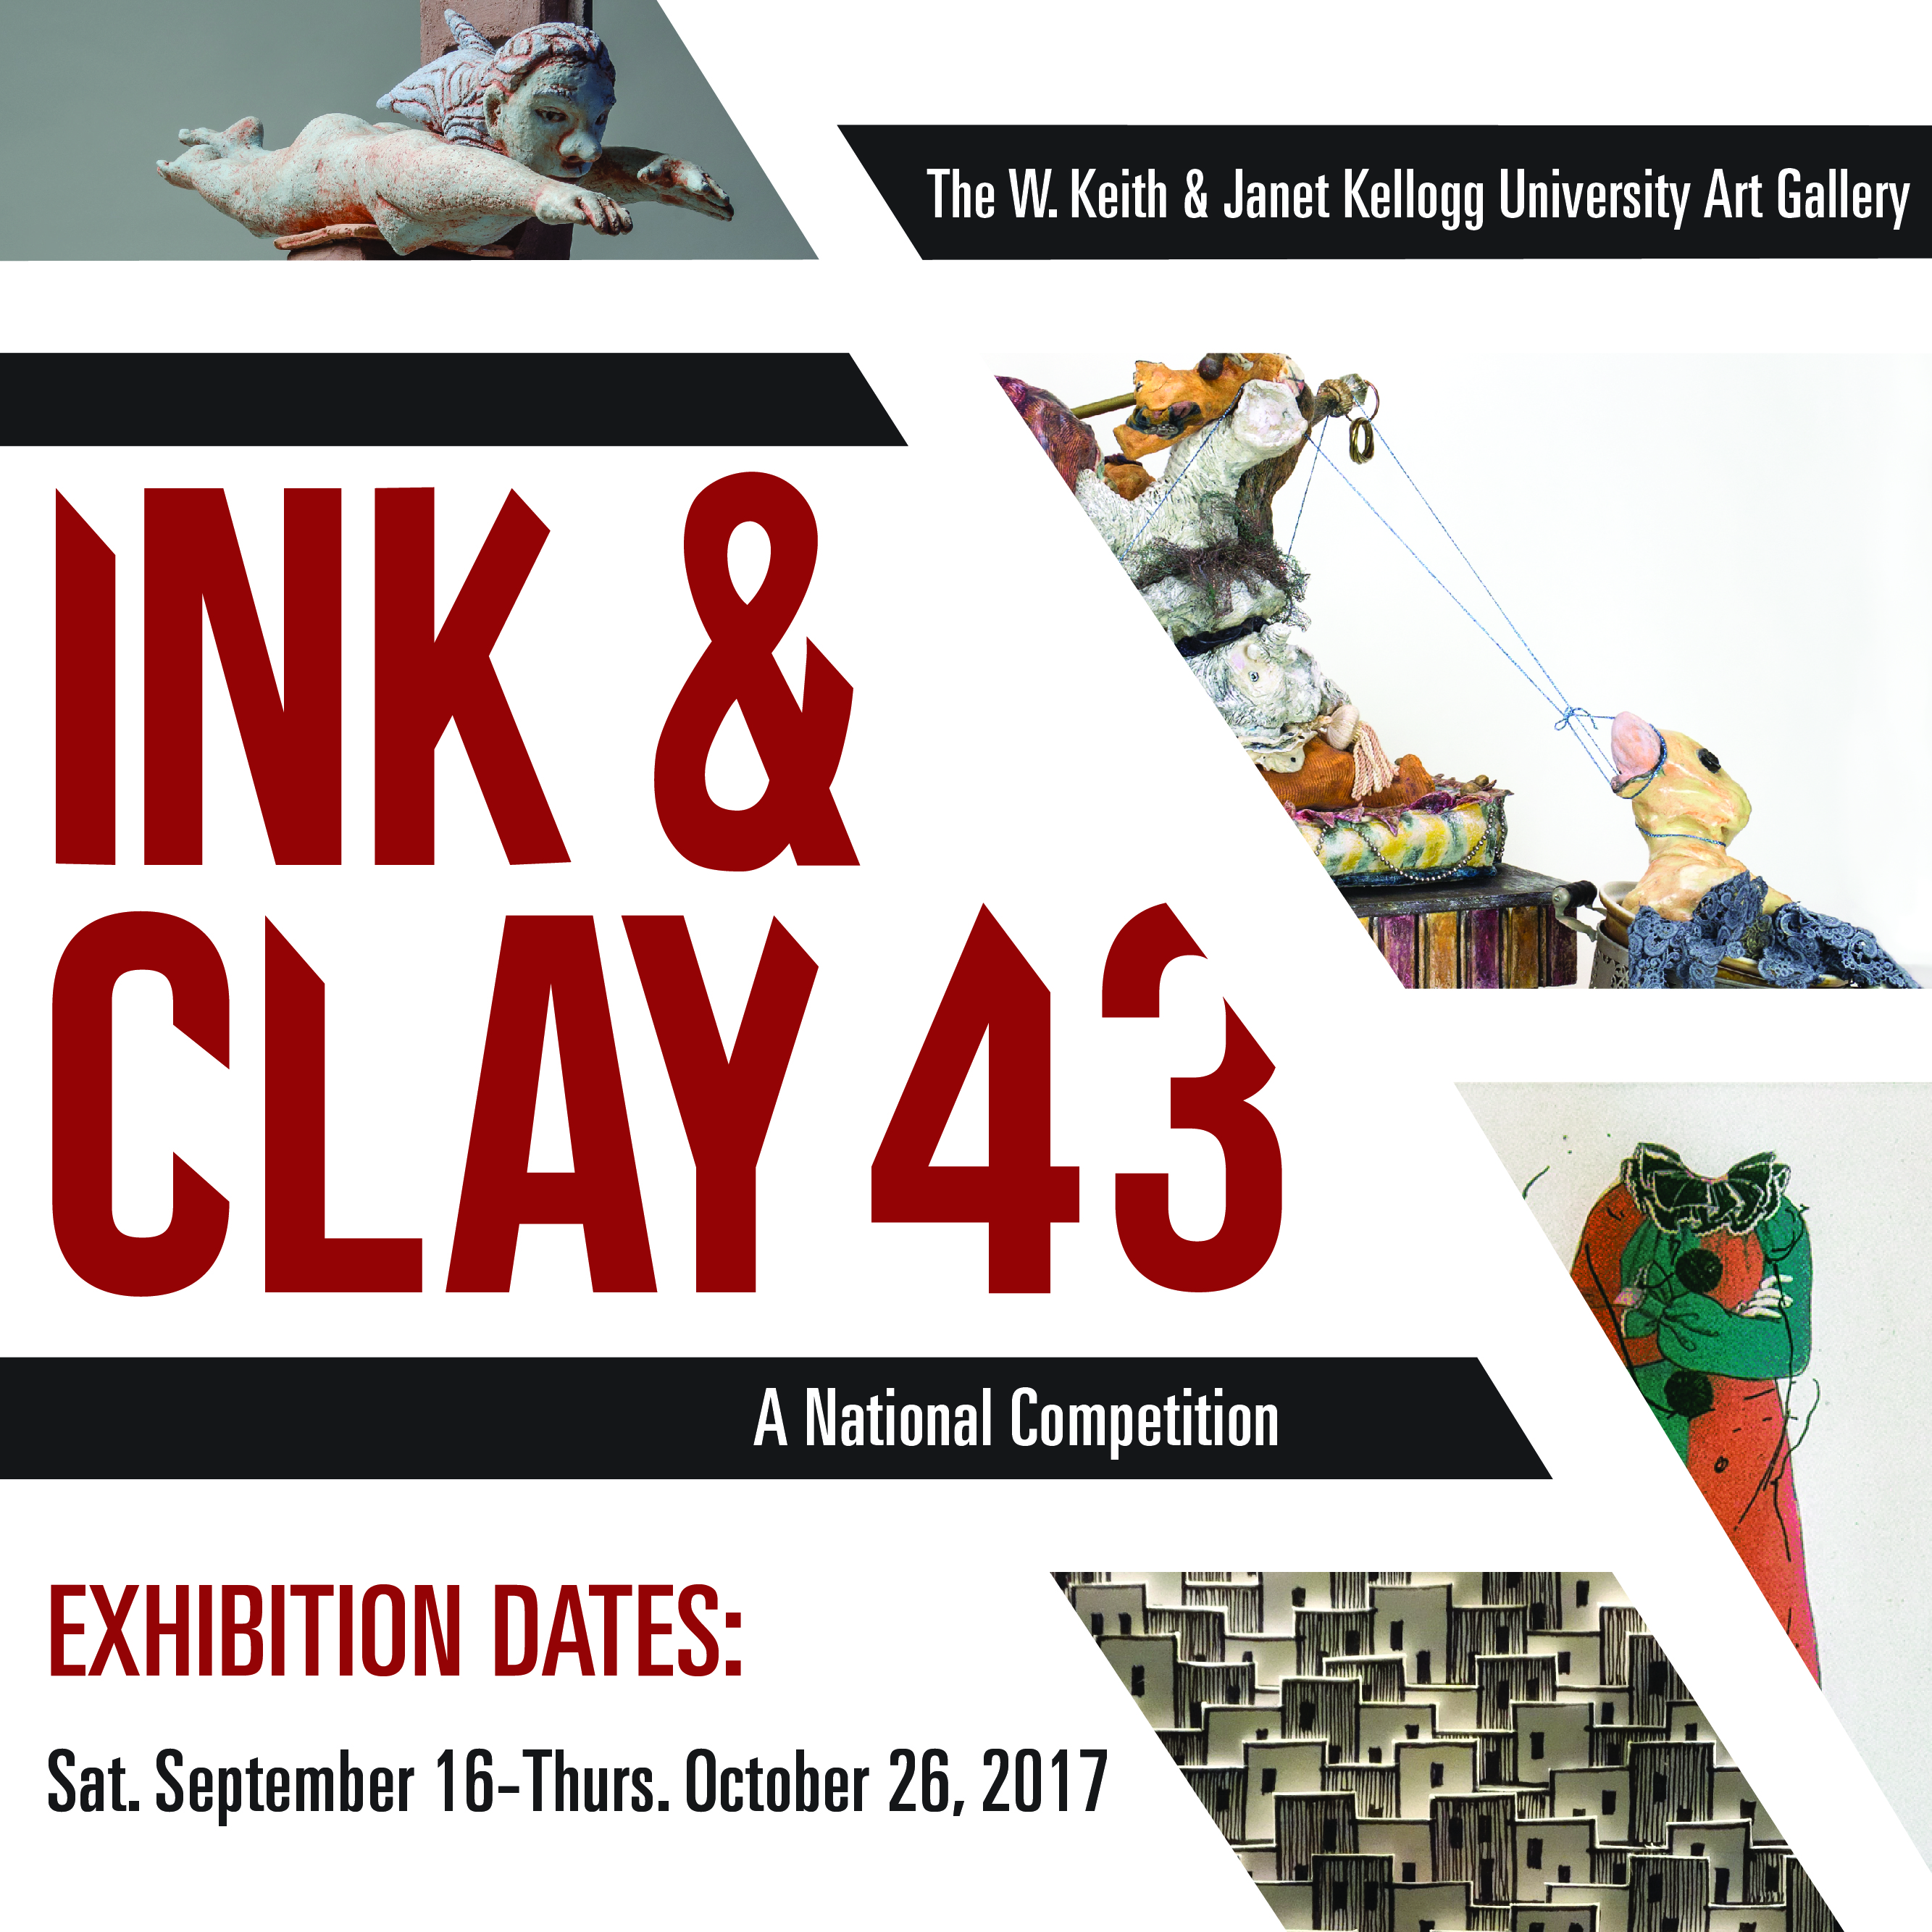 The W. Keith & Janet Kellogg University Art Gallery. Ink & Clay 43, a National Competition. Exhibition Dates: Saturday, September 16th - Thursday, October 26, 2017.